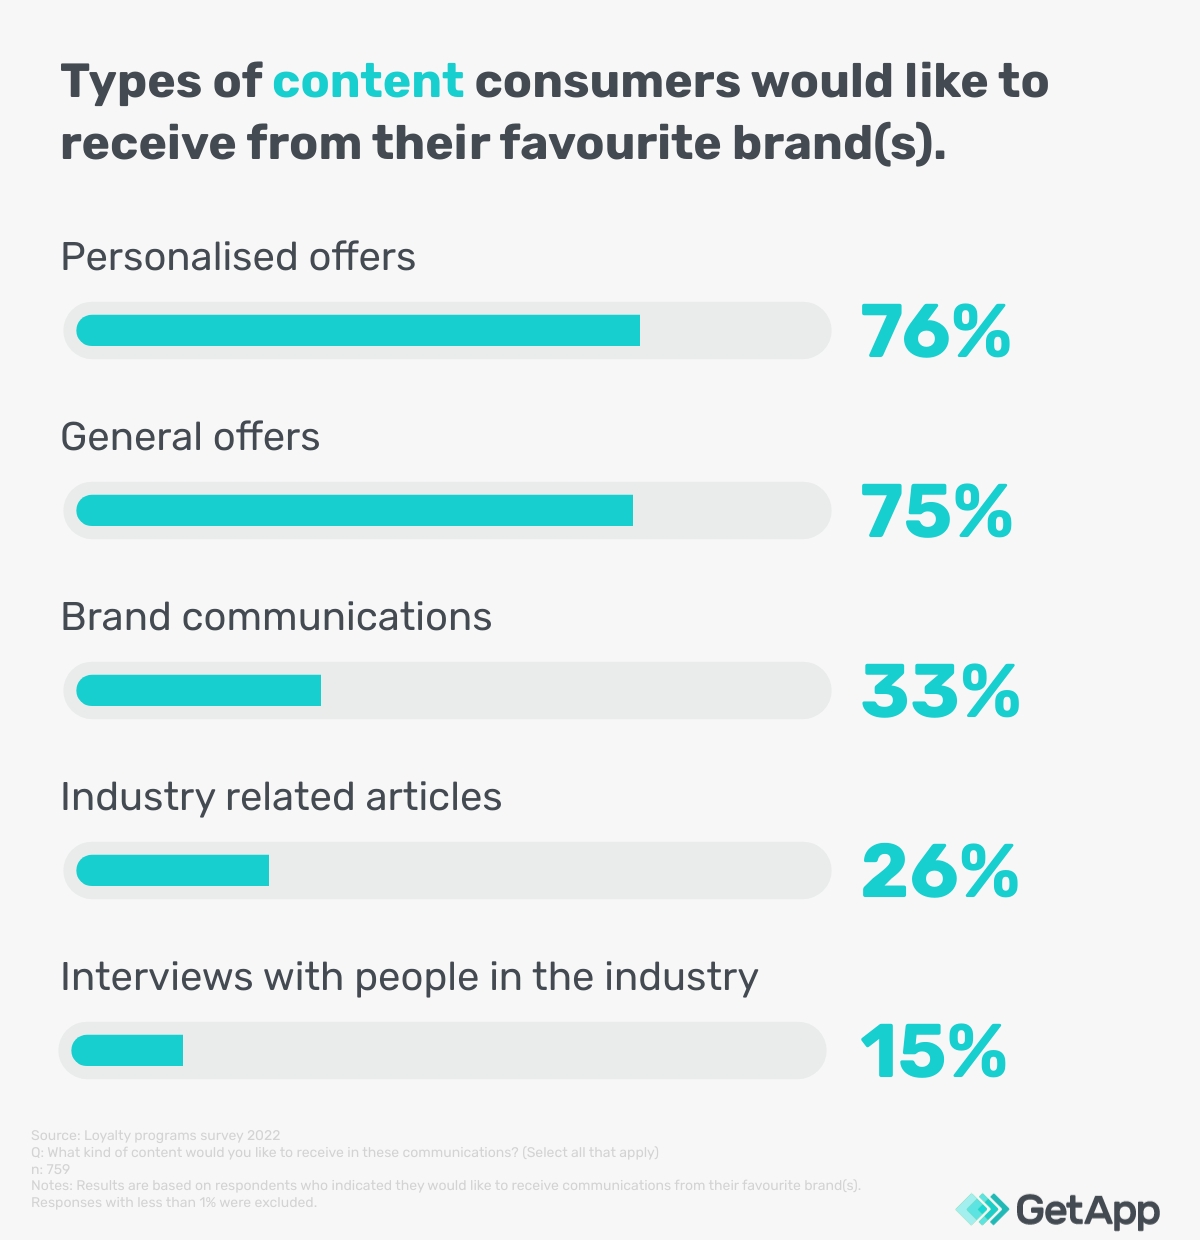 Types of content consumers would like to receive from their favourite brand(s)